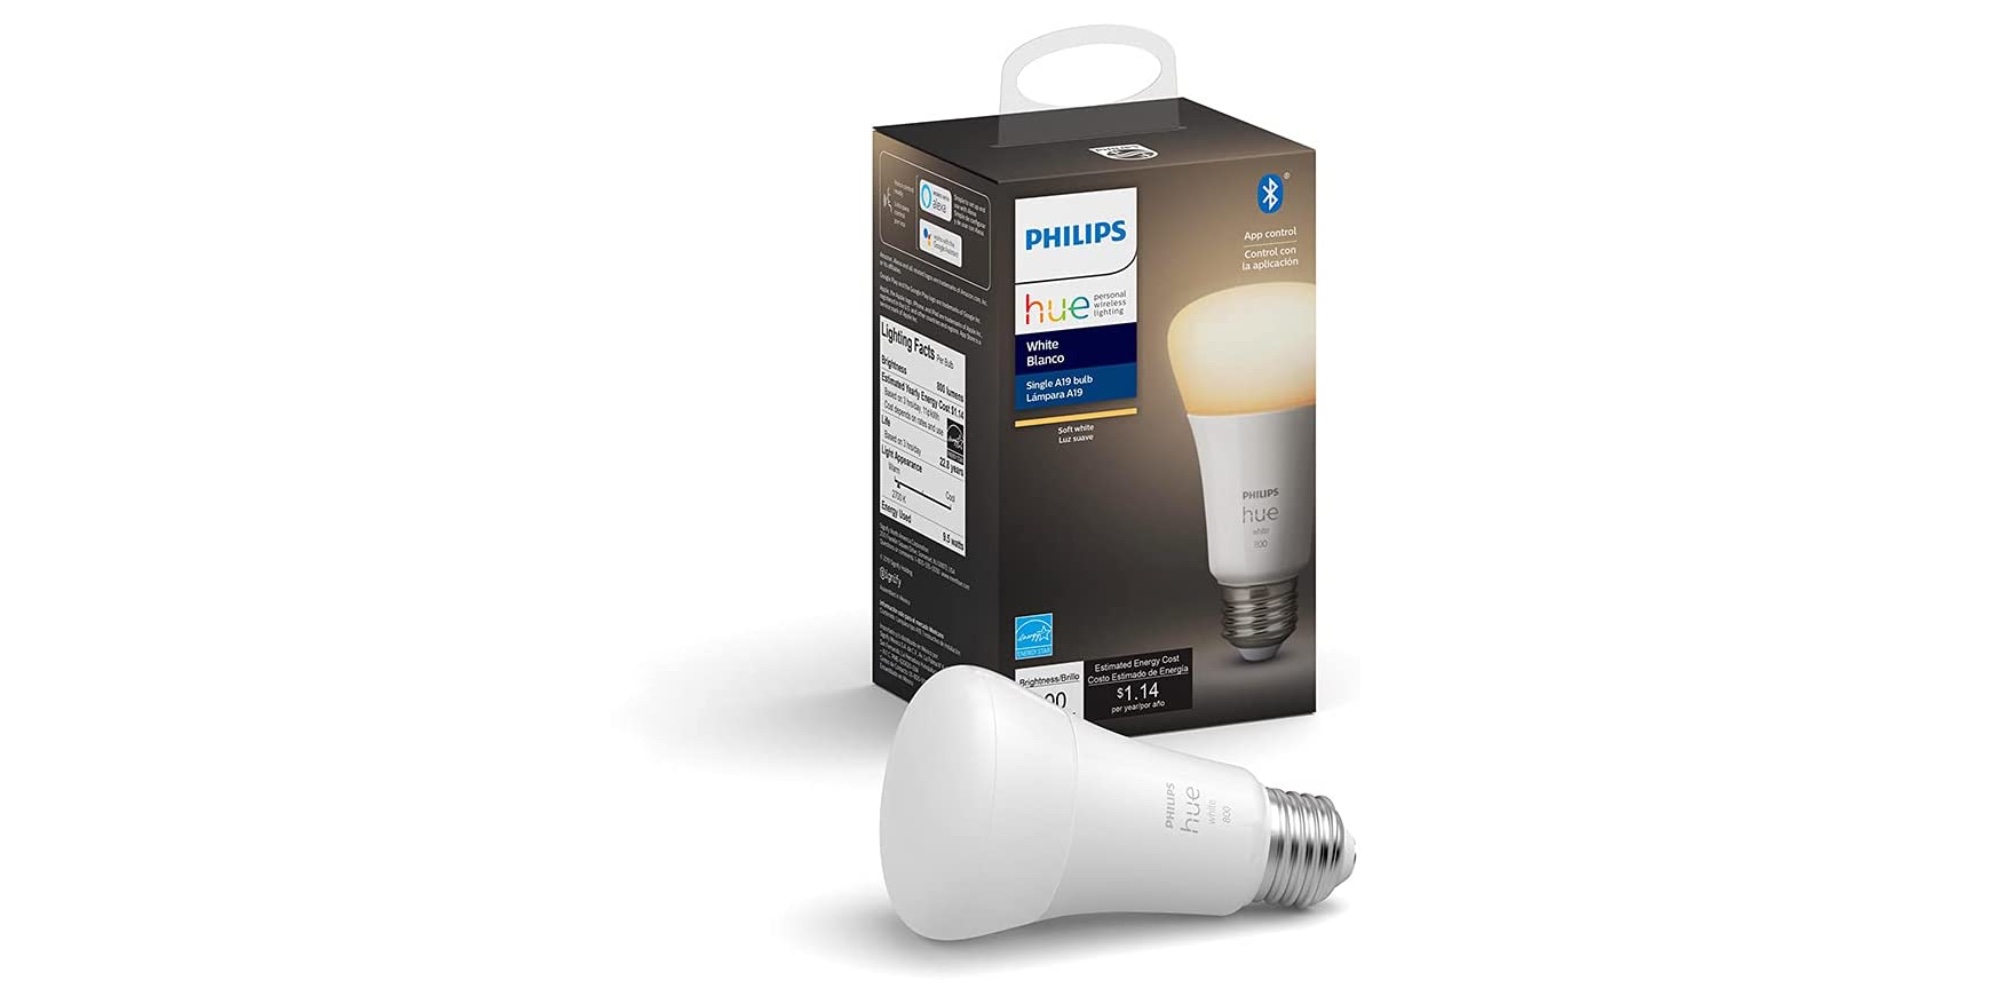 Brim Explicitly Mastery Philips Hue's latest dimmable smart bulb works with Bluetooth and Zigbee at  $10 (Save 33%)